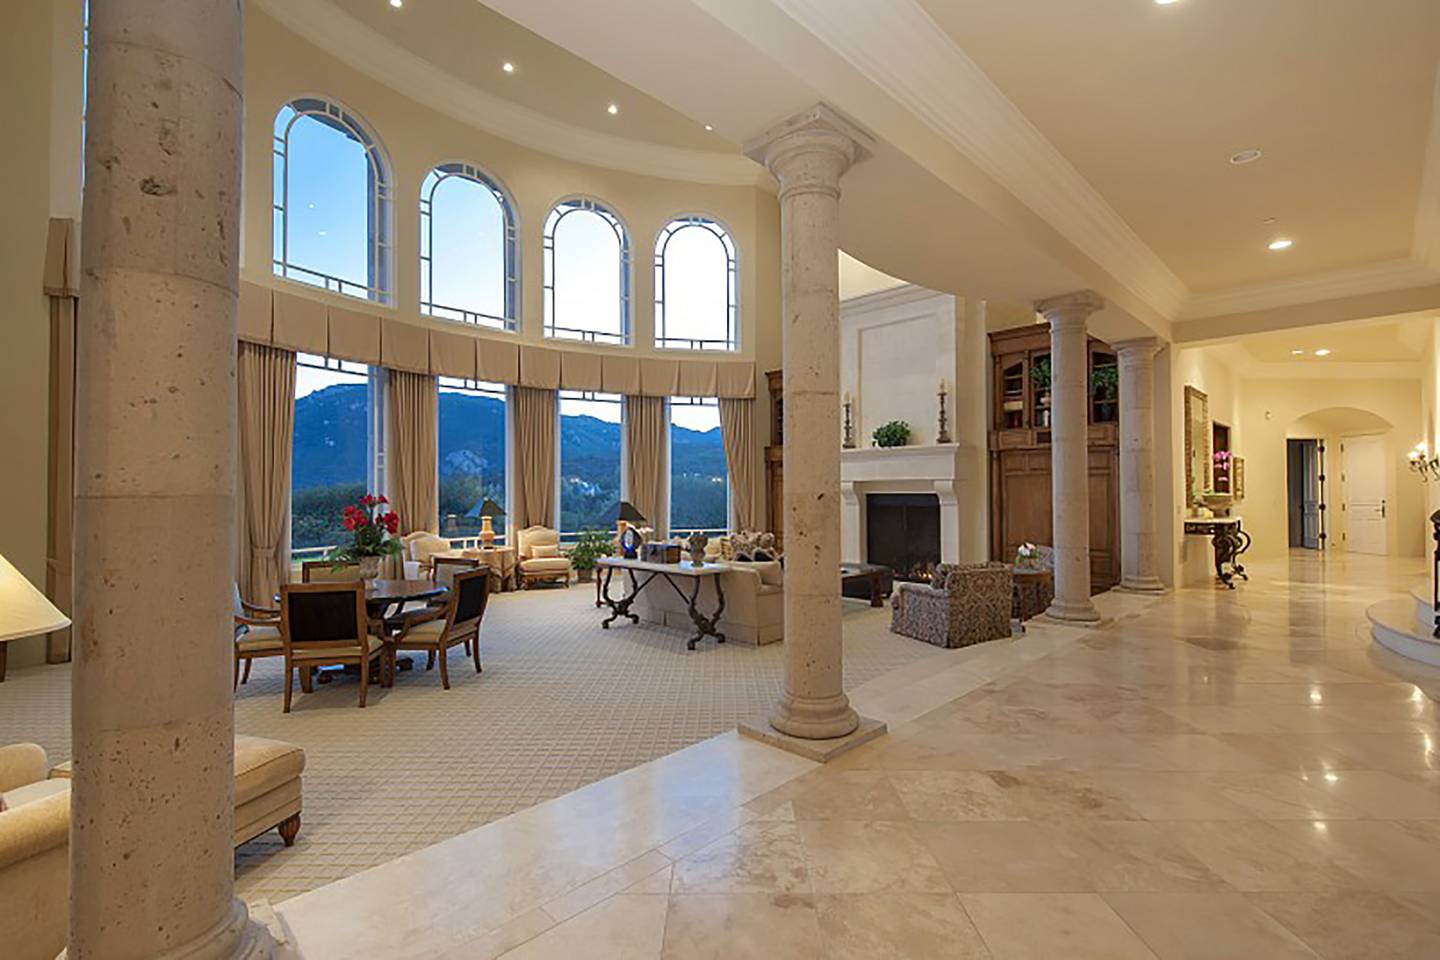 Britney Spears's villa is located in Thousand Oaks, California. The property consists of five bedrooms and seven-and-a-half bathrooms. Photo: Engel & Volkers